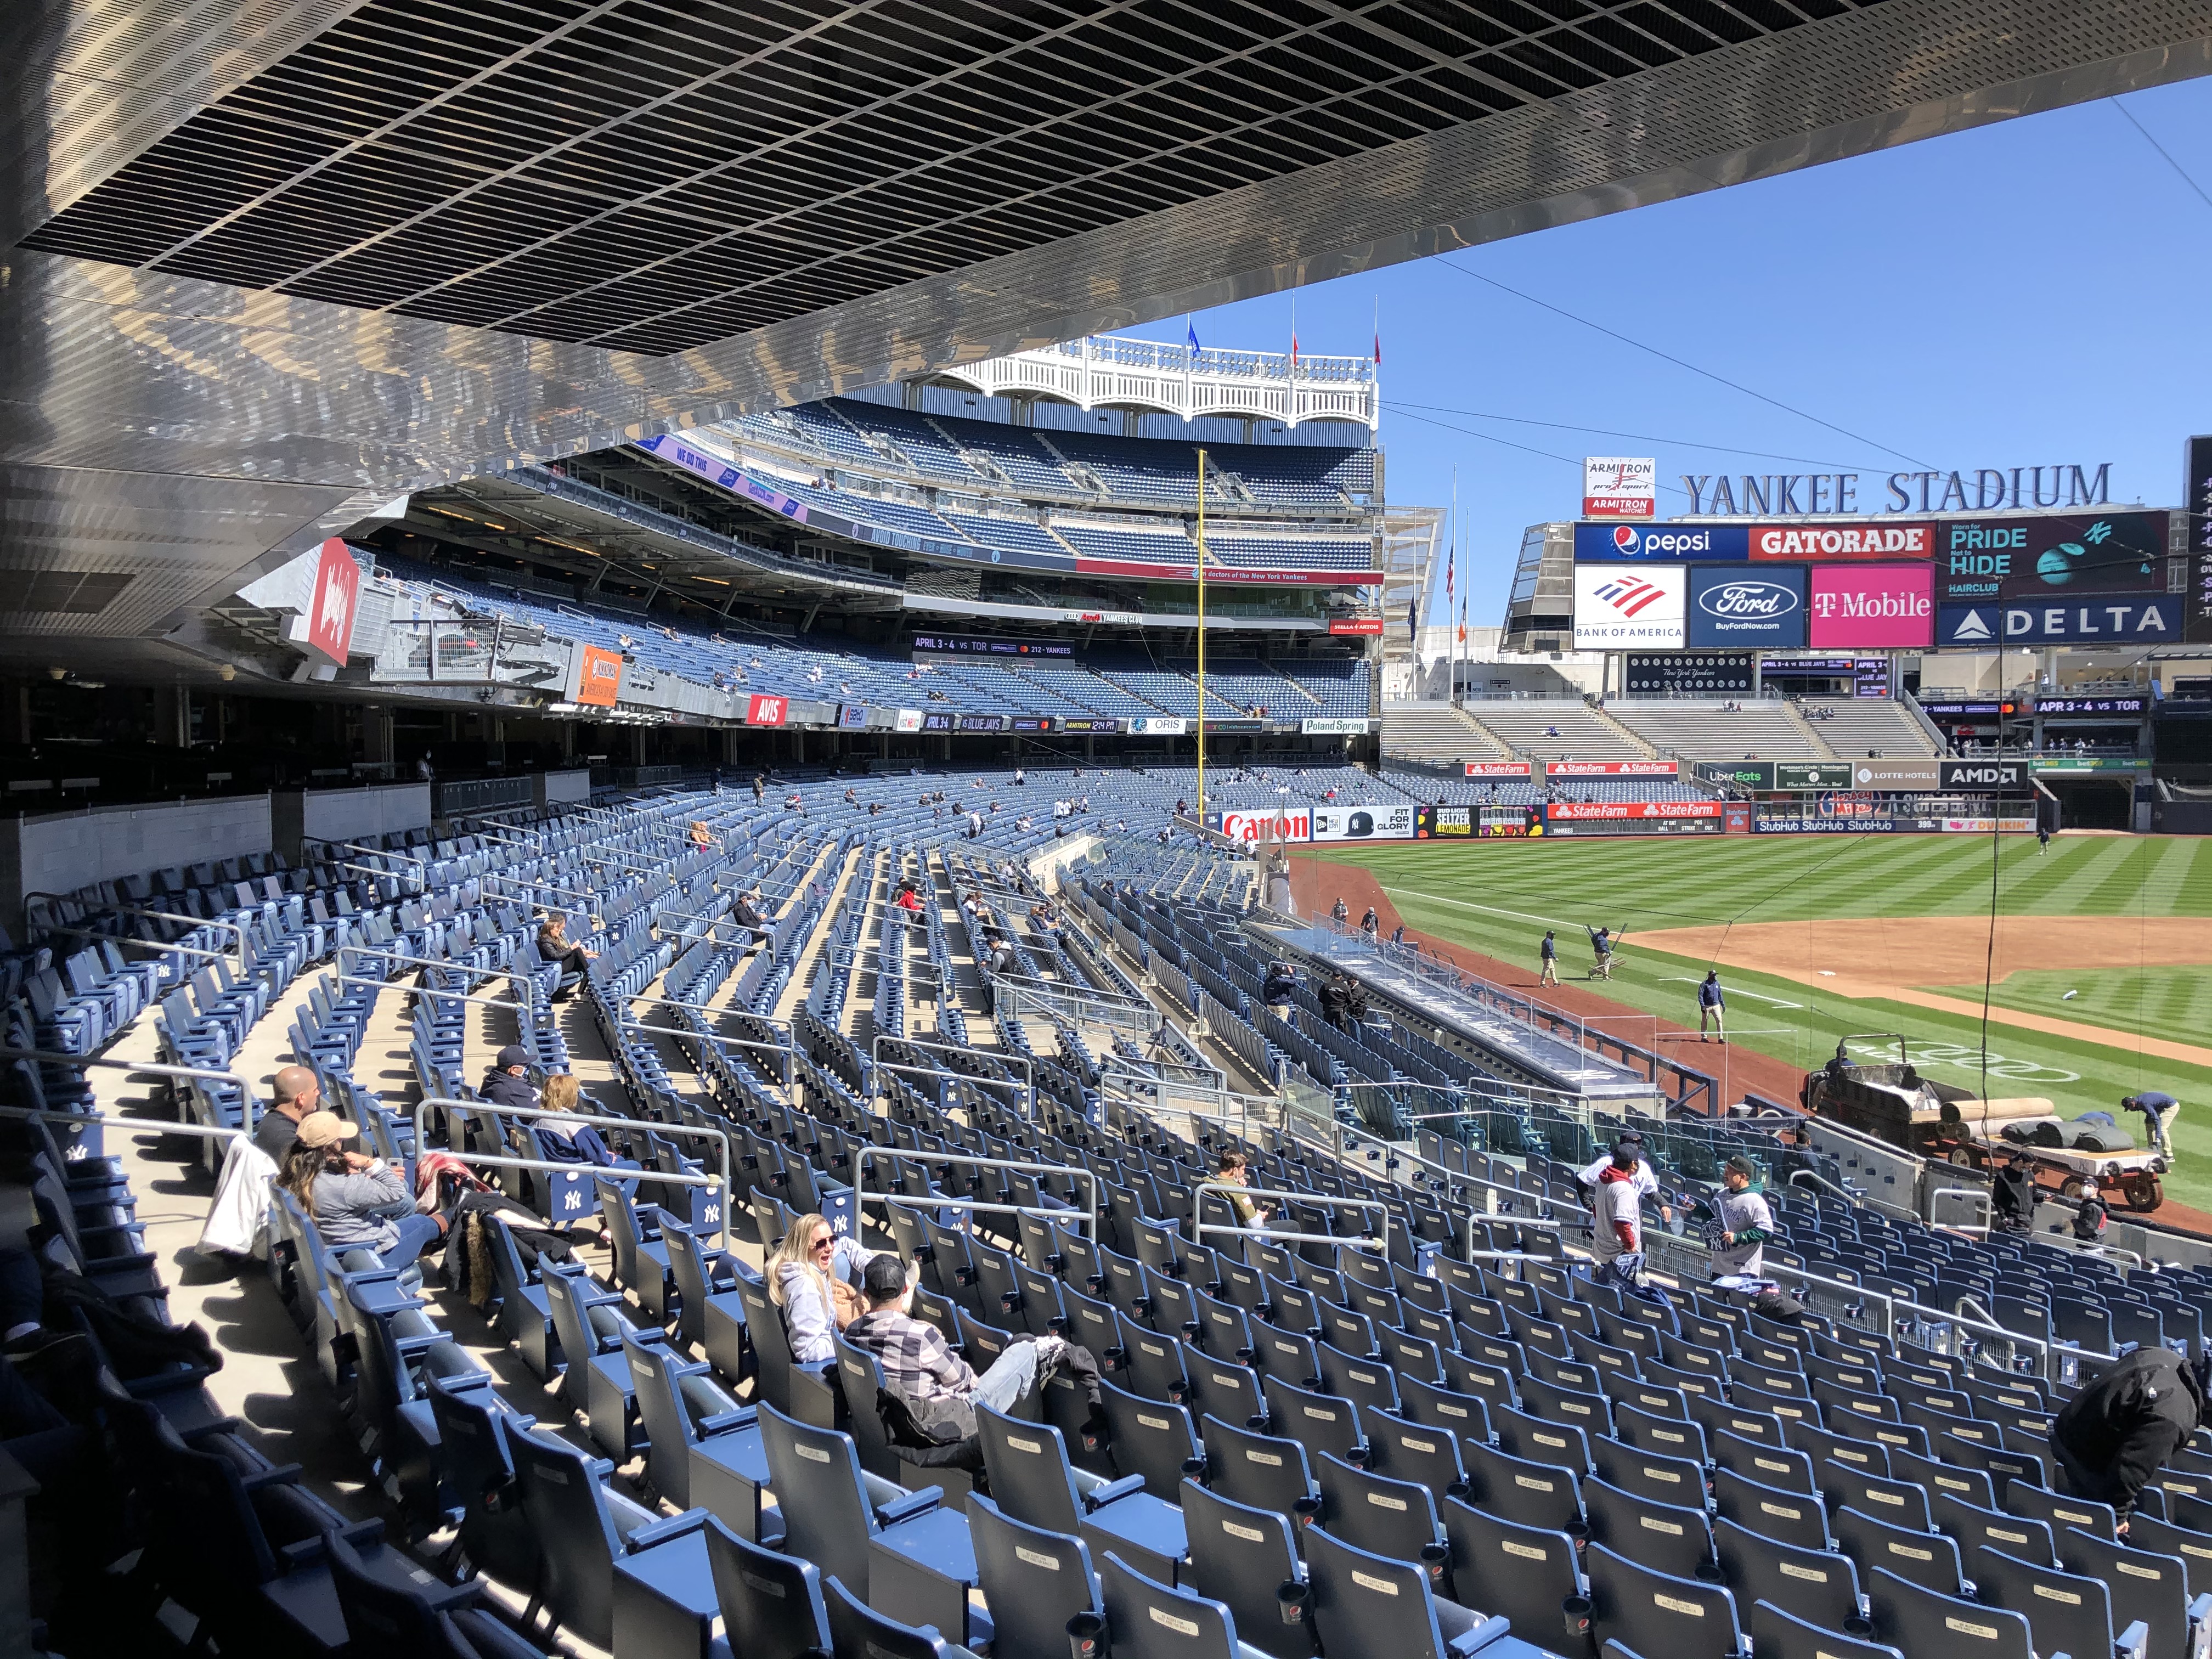 I went to a Yankees game during COVID. Here's 9 things you need to